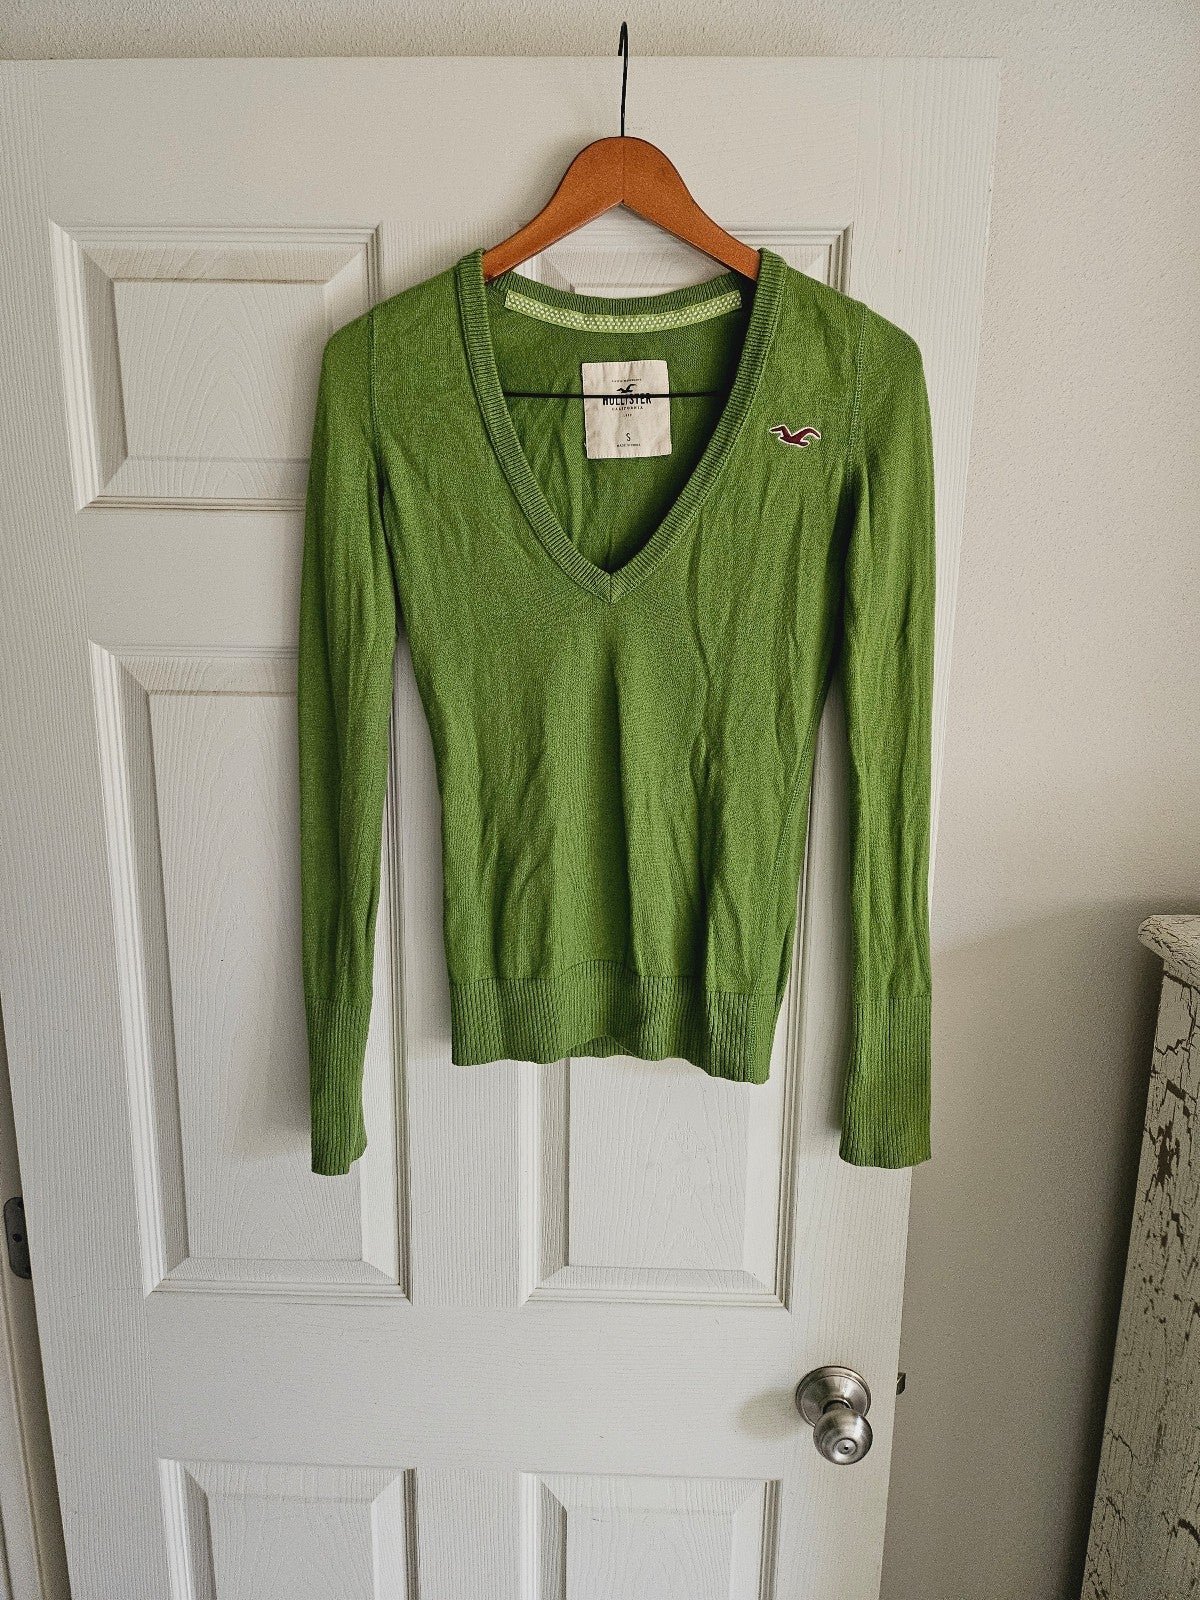 Fashion Hollister S V Neck Sweater Green Good Used Condition pOZhPm5IP just buy it